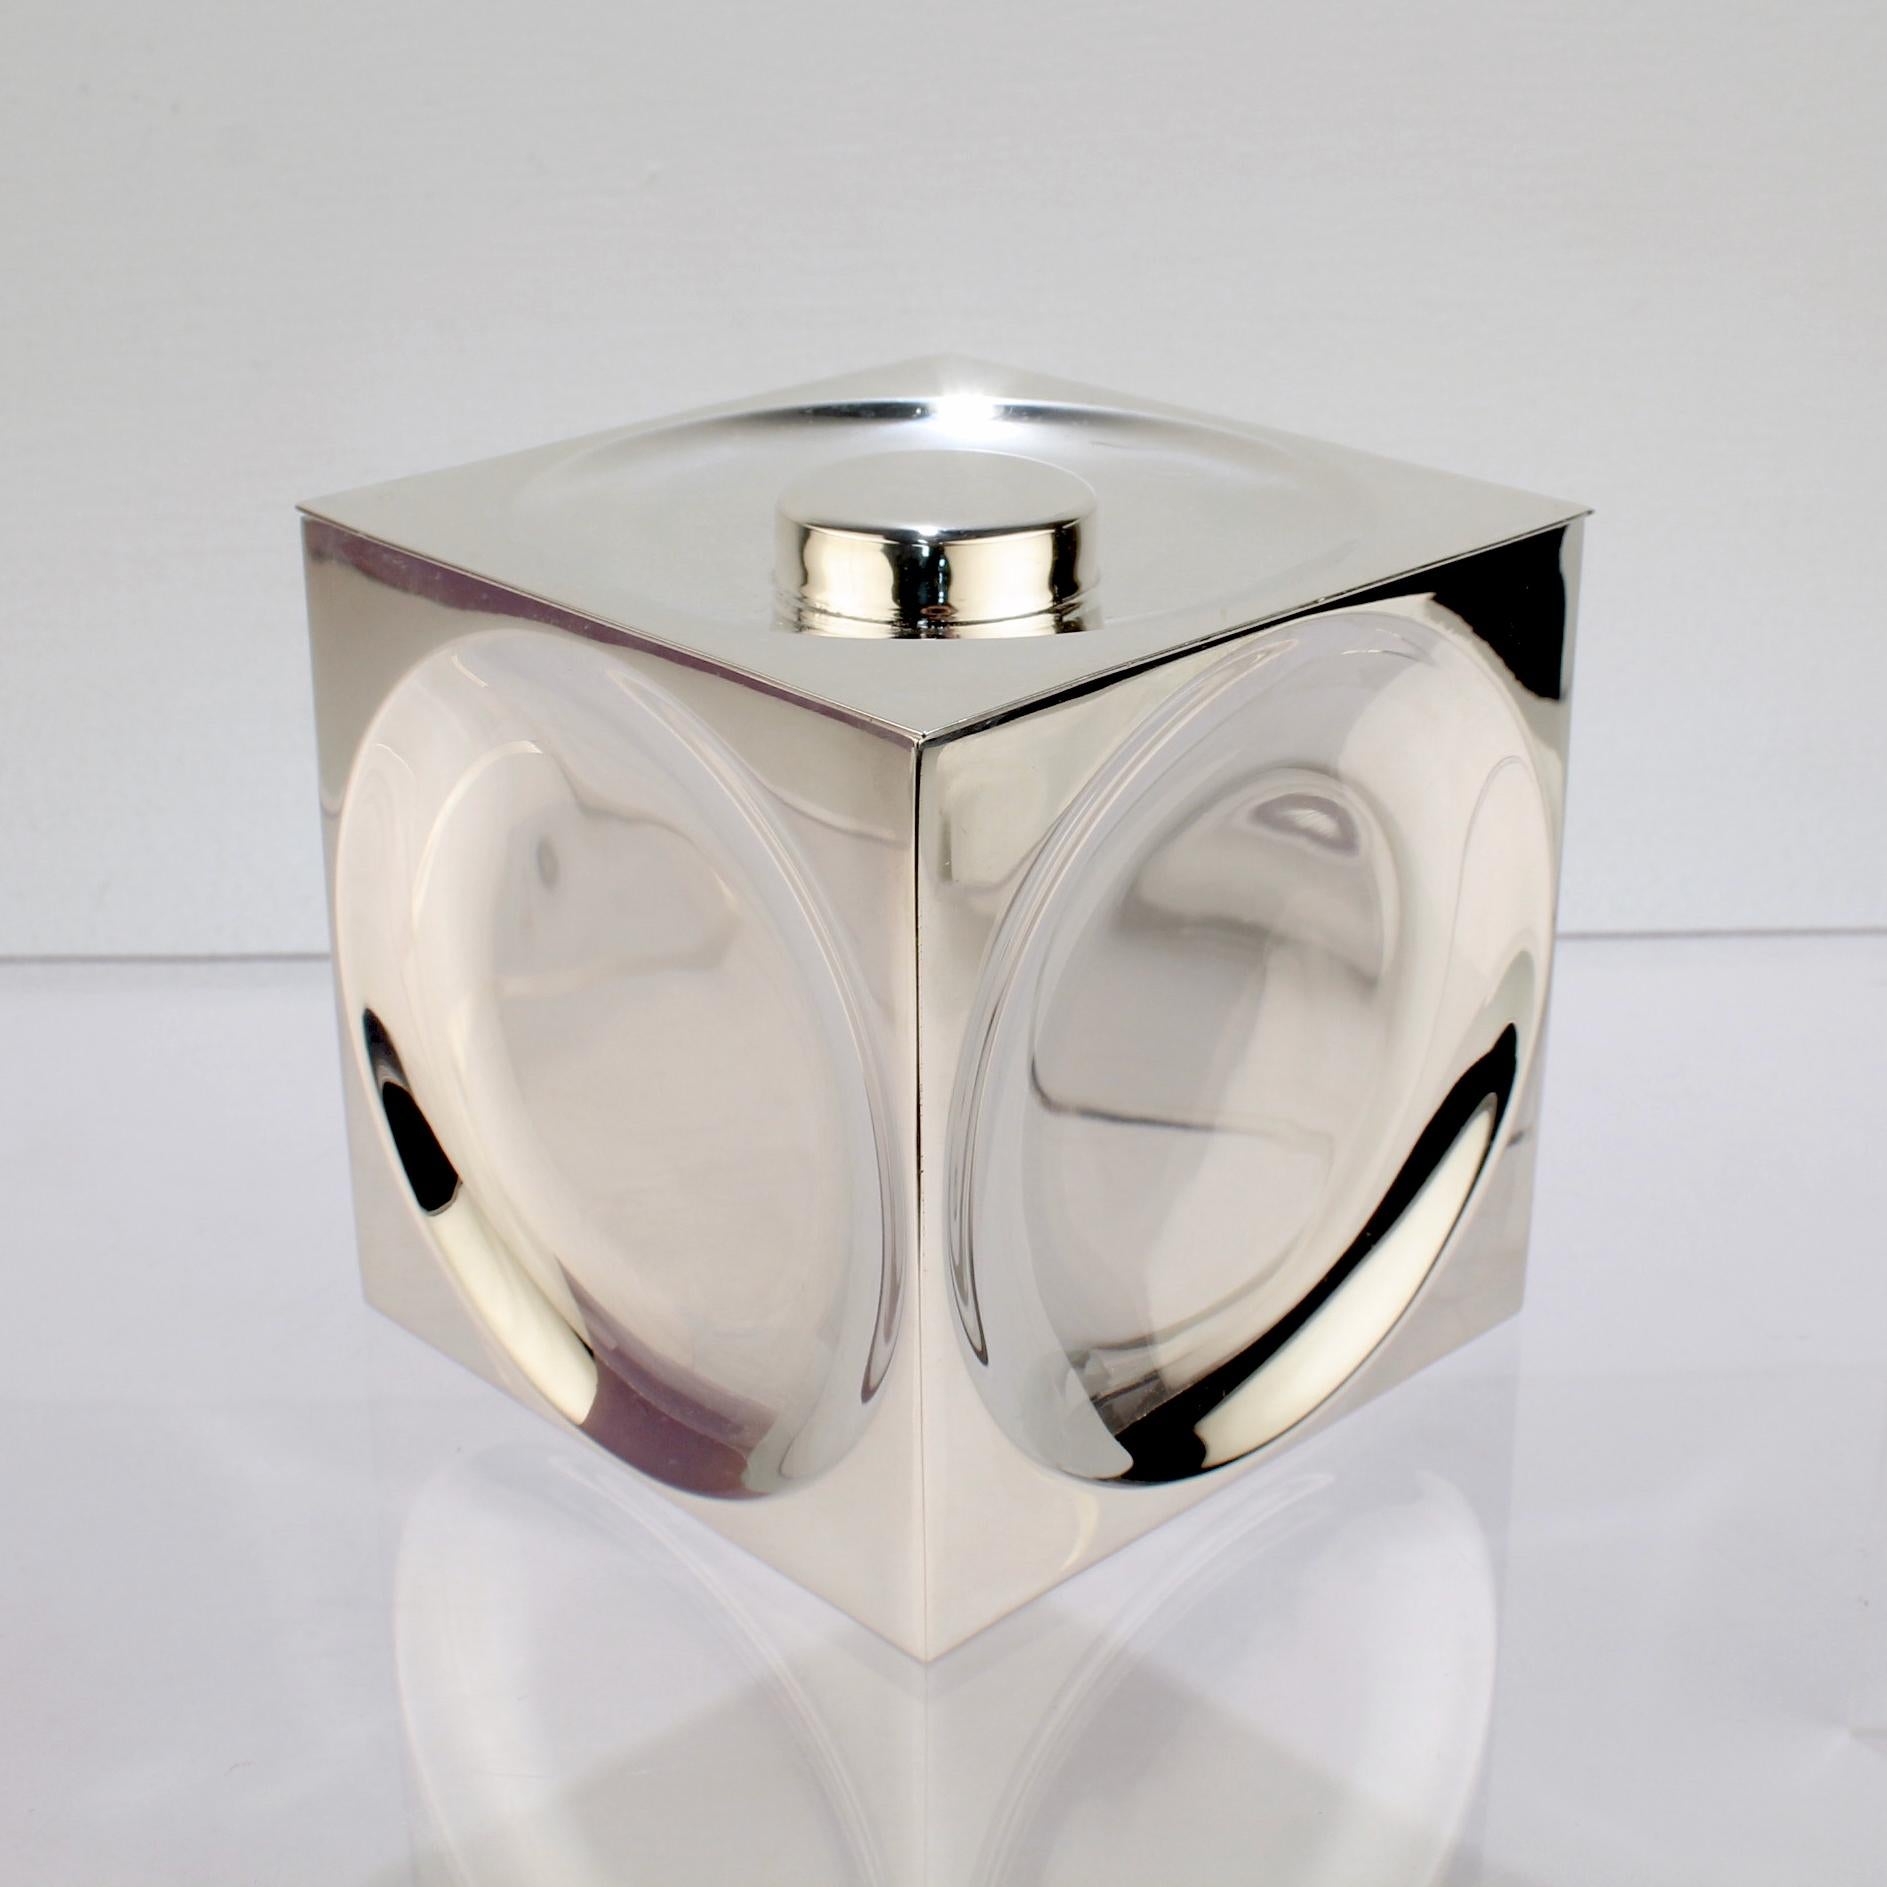 A wonderful vintage Modernist, geometric Tiffany & Co. box in sterling silver.

In the form of a cube with convex or inverted circles to each square shaped side and the square cover. The cover has a button finial.

Simply cool, modernist Op-Art